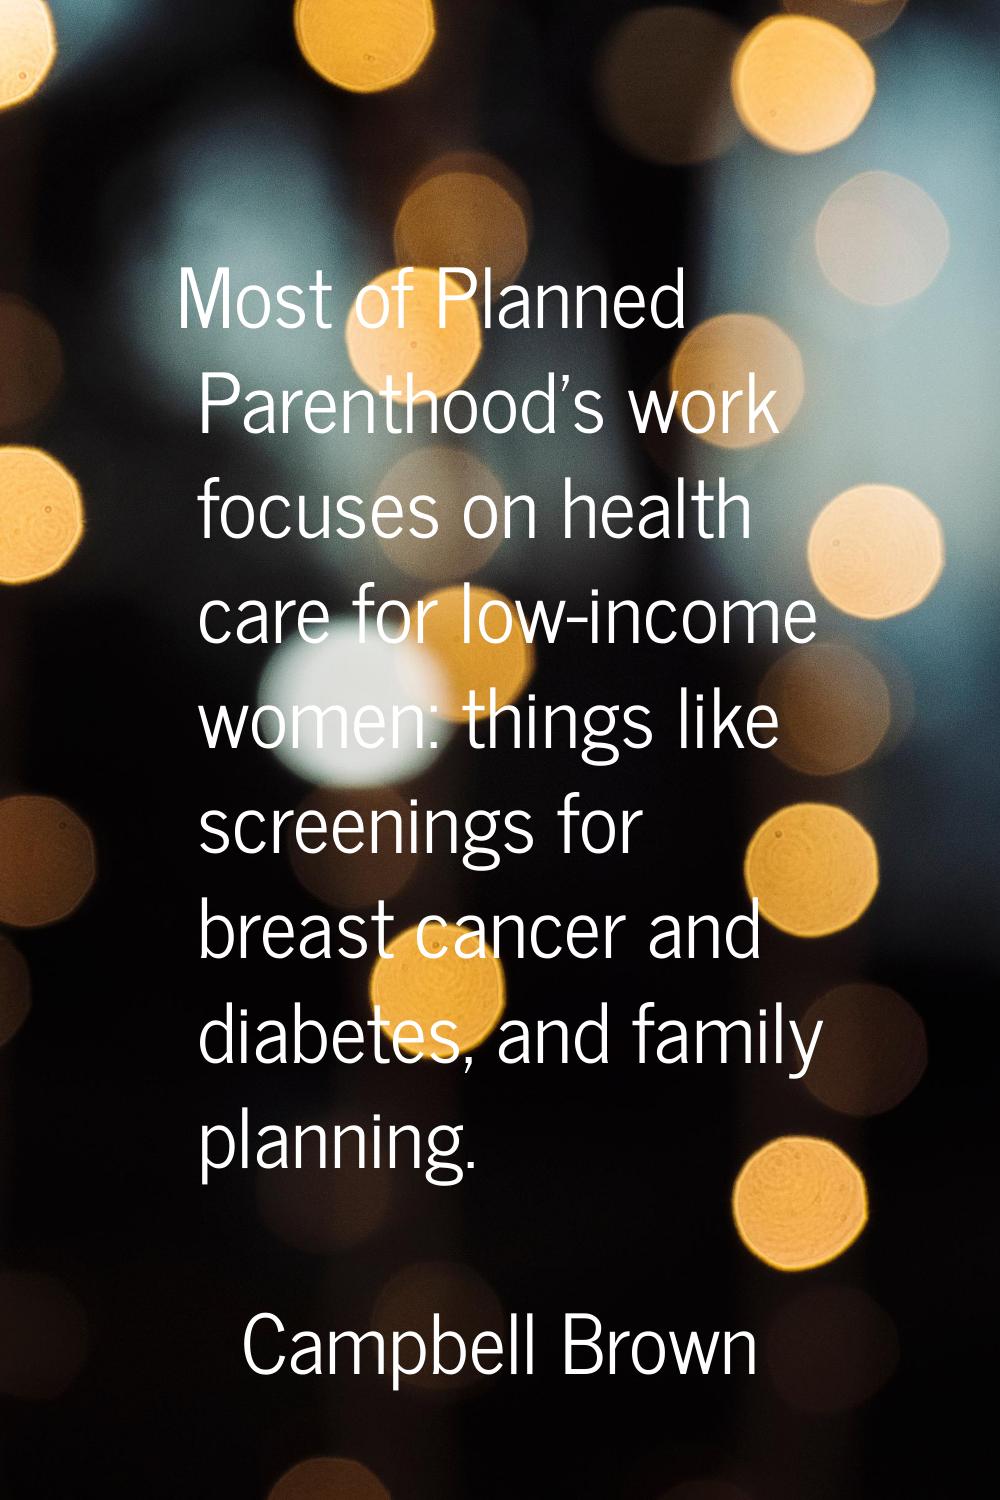 Most of Planned Parenthood's work focuses on health care for low-income women: things like screenin